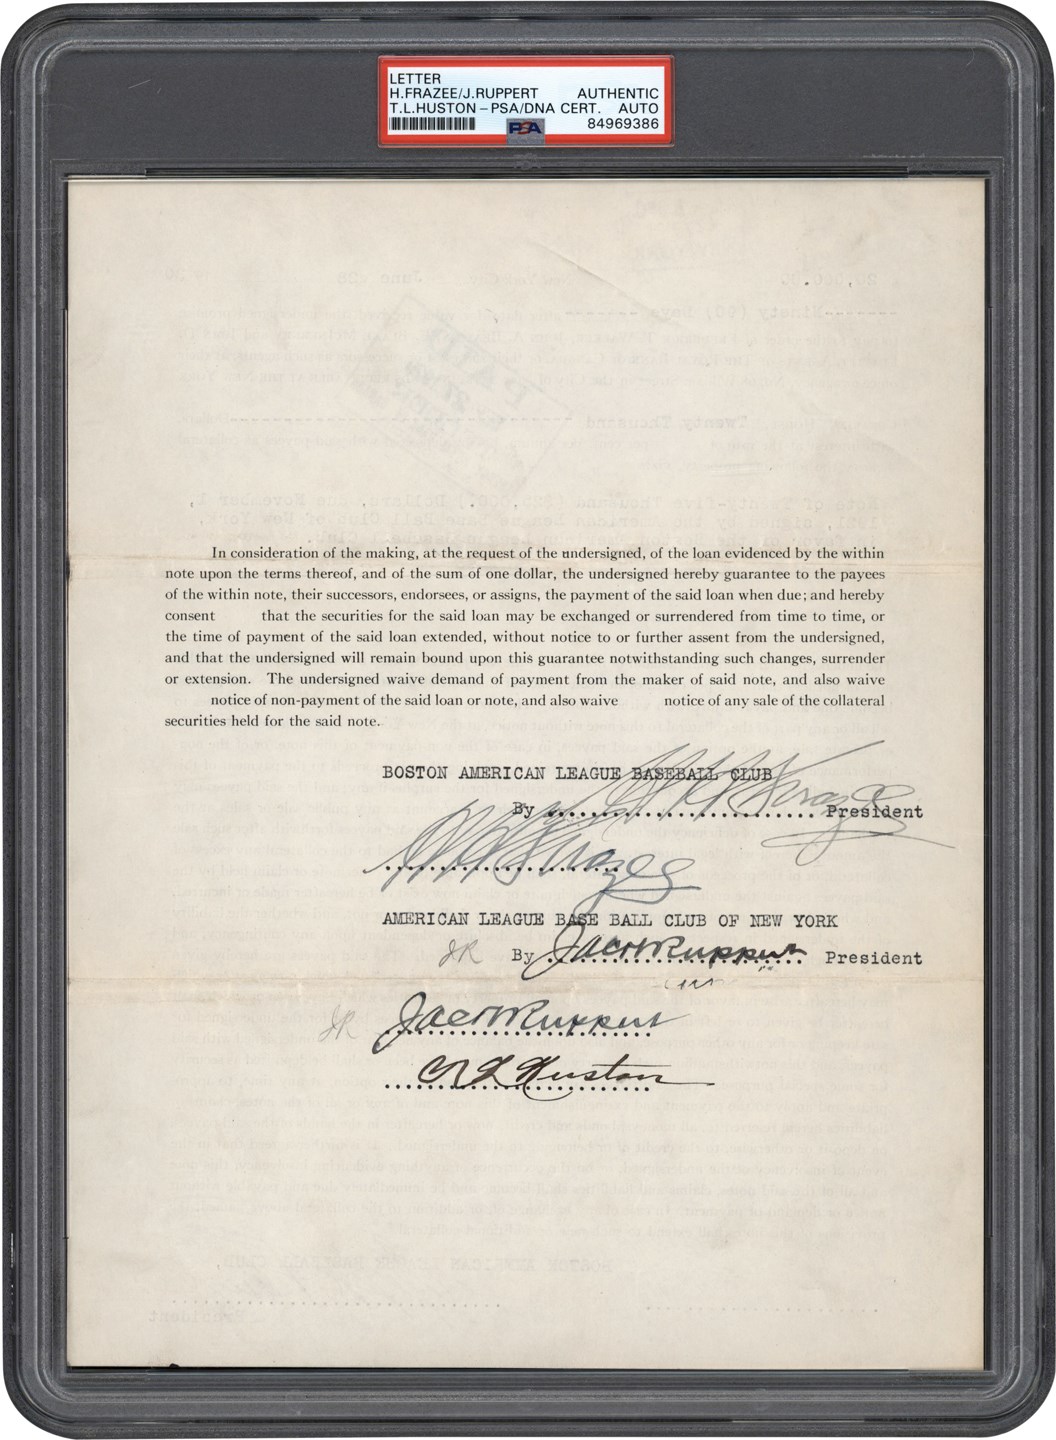 - 1920 Harry Frazee Promissory Note Directly Relating to the Sale of Babe Ruth with Related Correspondence (ex-Barry Halper Collection)